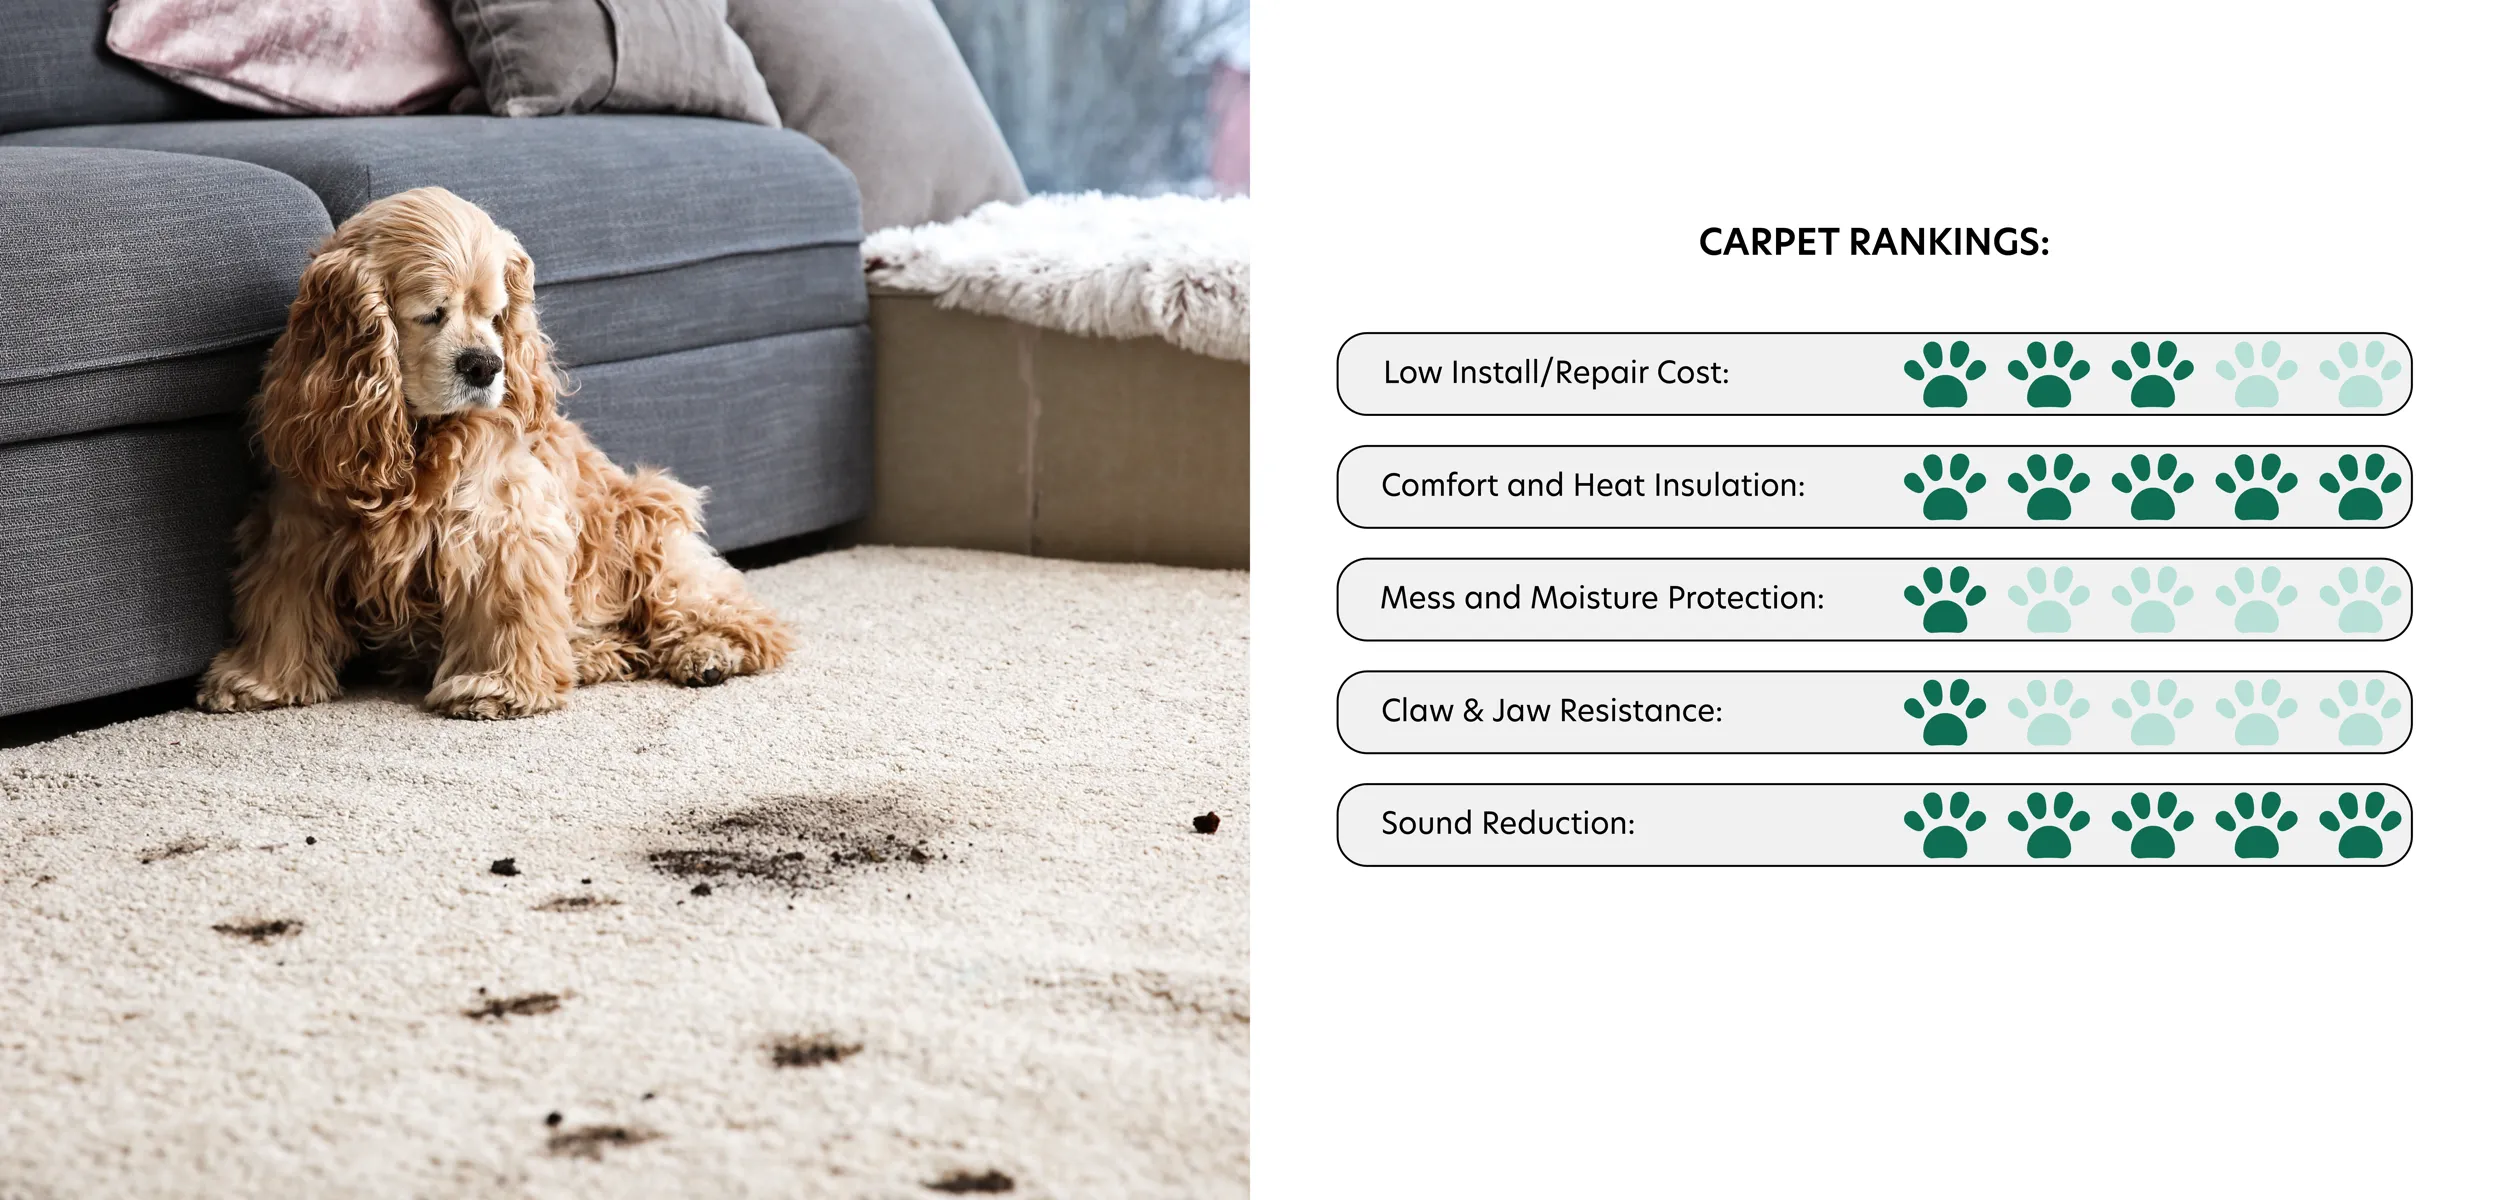 Sad dog sitting on dirty carpet next to a couch. Carpet rankings in best flooring for pets. Low Install/Repair Cost: 3 Paws. Comfort and Heat Insulation: 5 Paws. Mess and Moisture Protection: 1 Paws. Claw & Jaw Resistance: 1 Paws. Sound Reduction: 5 Paws.